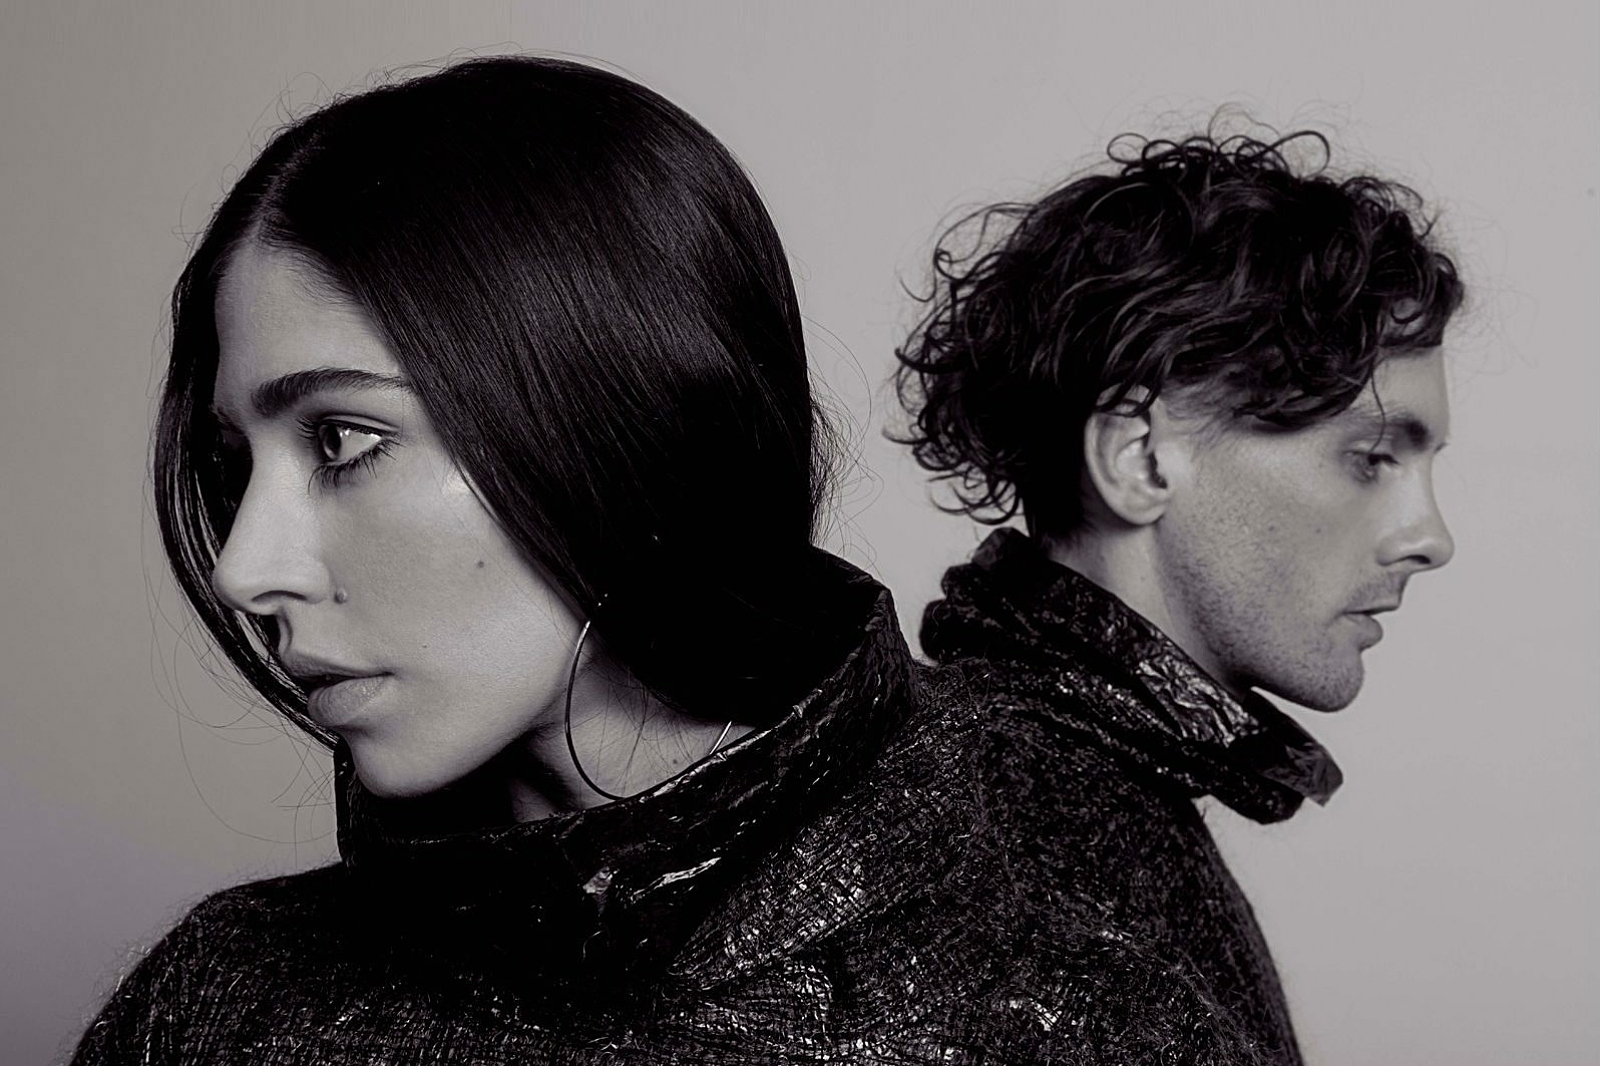 Chairlift announce their final shows